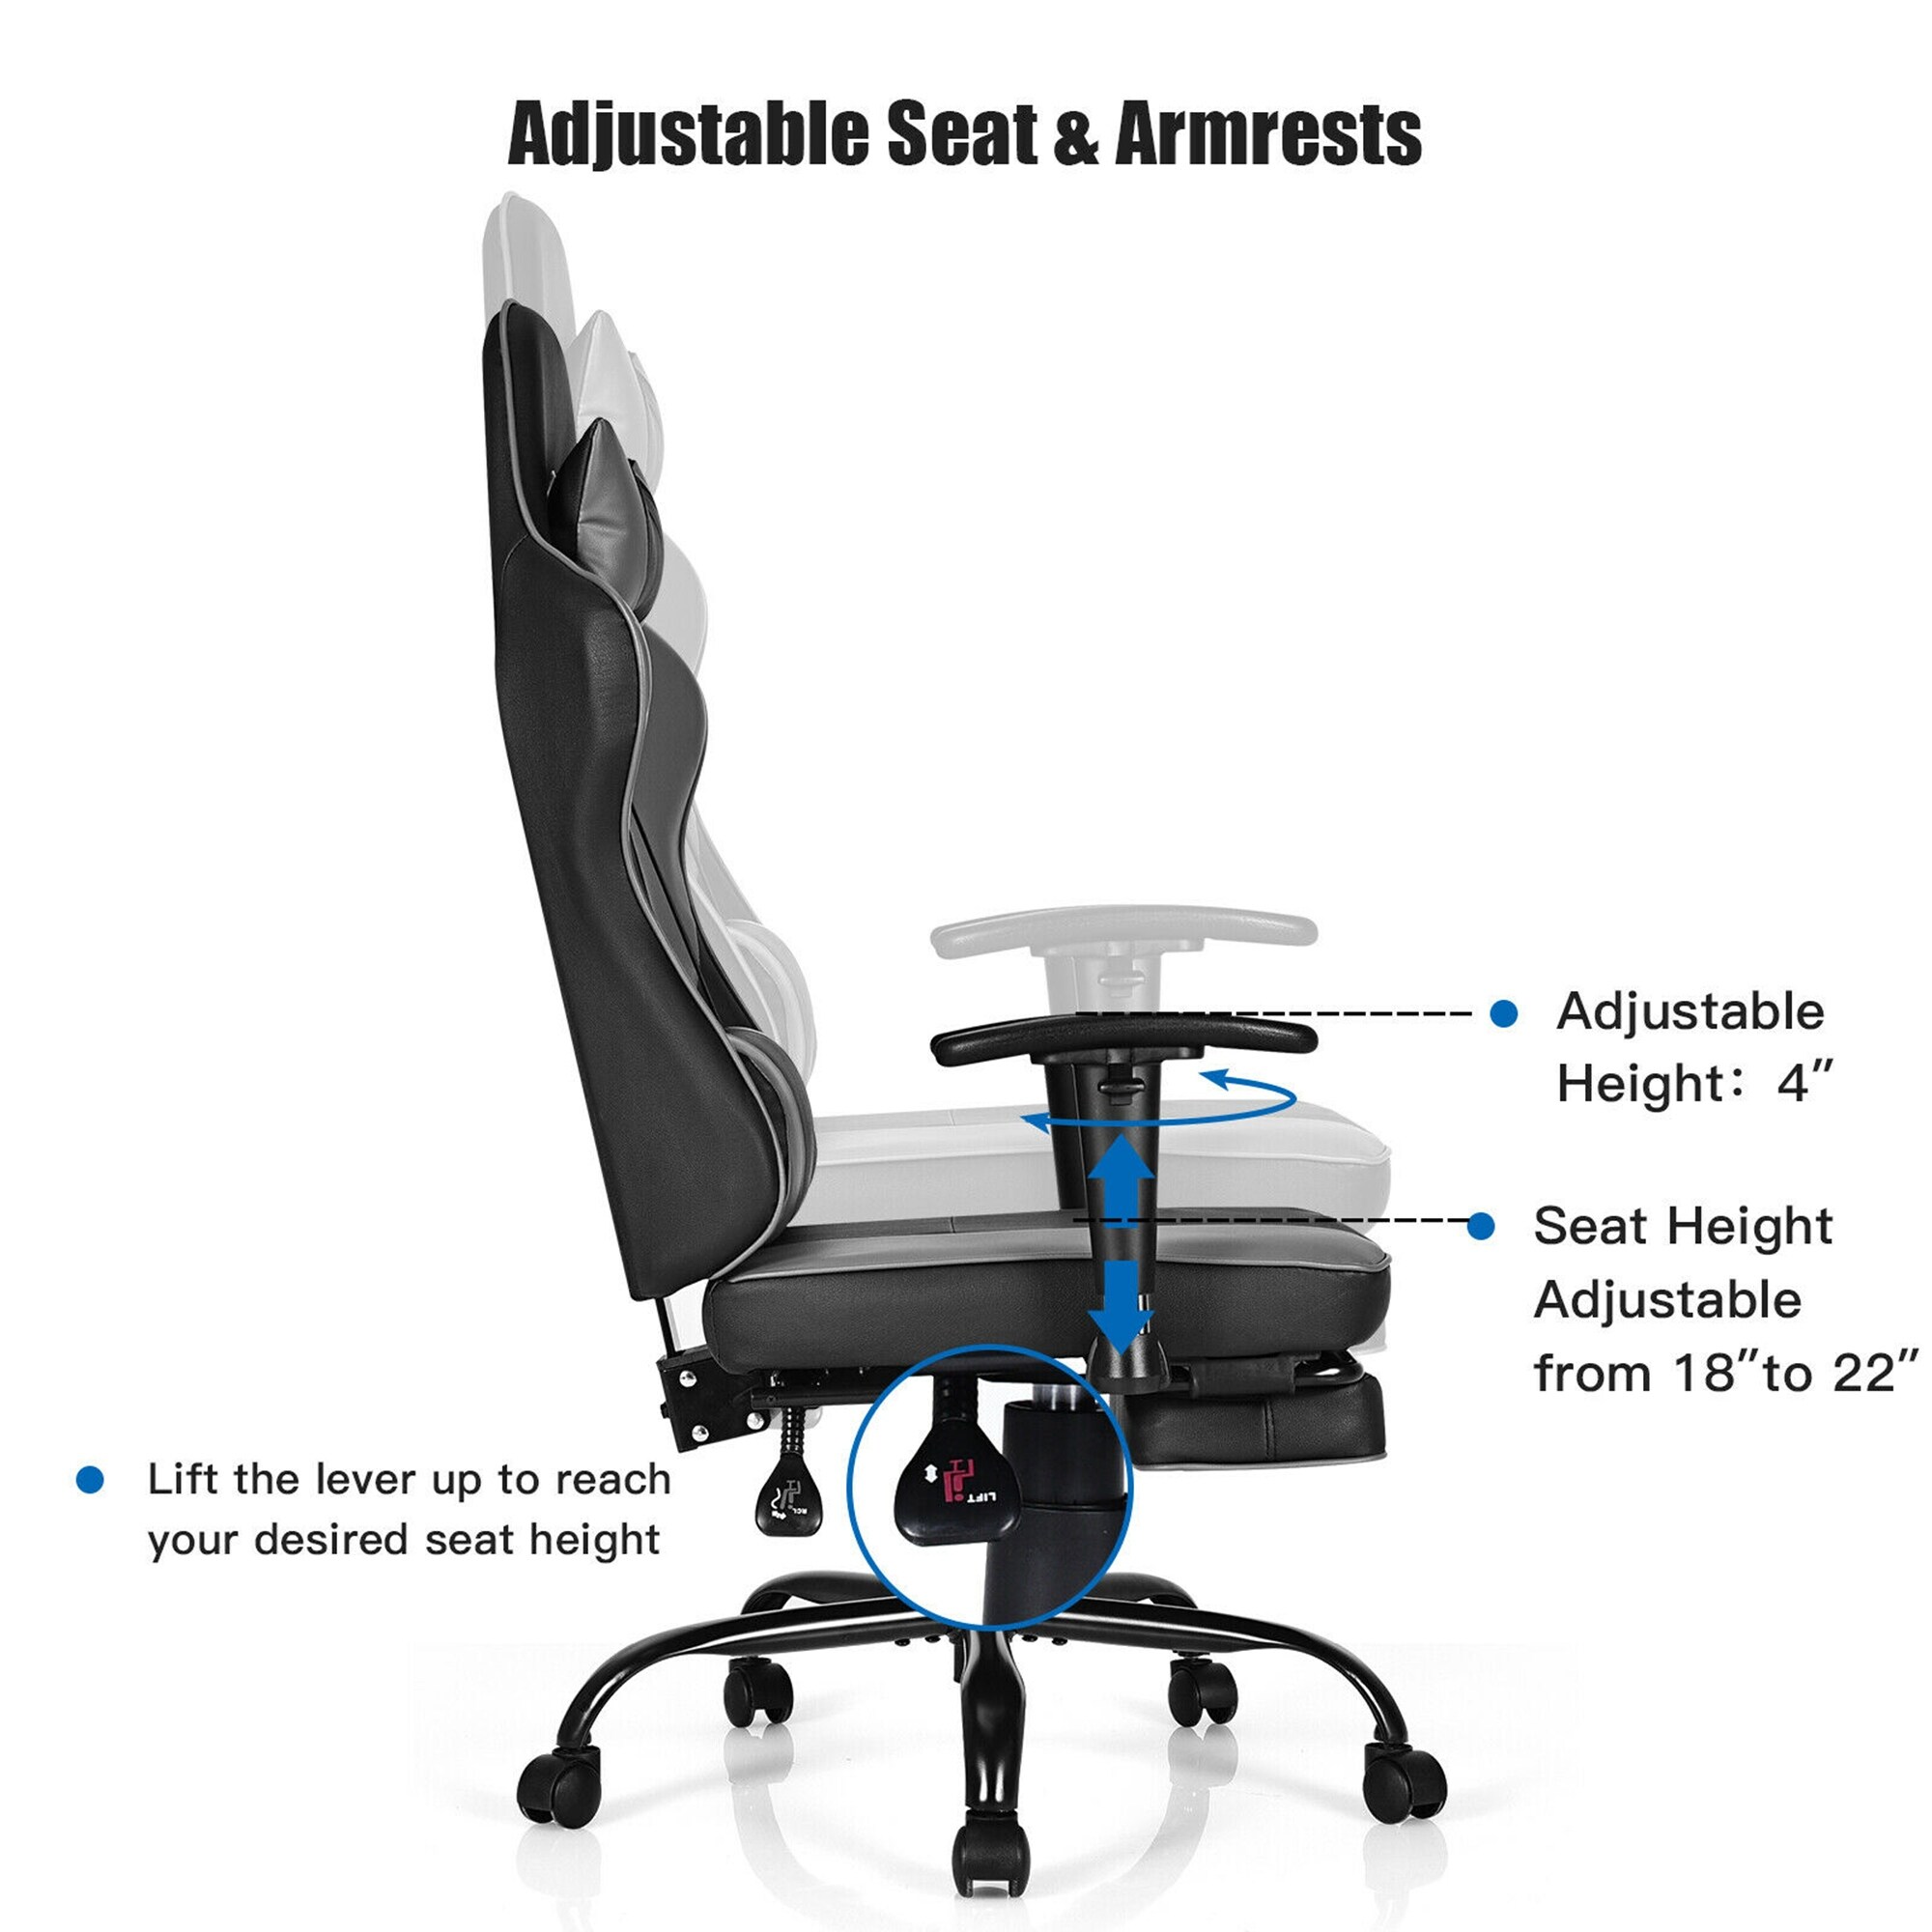 Gaming Chair Racing Style Office Chair with Lumbar Support - Bed Bath &  Beyond - 32500155